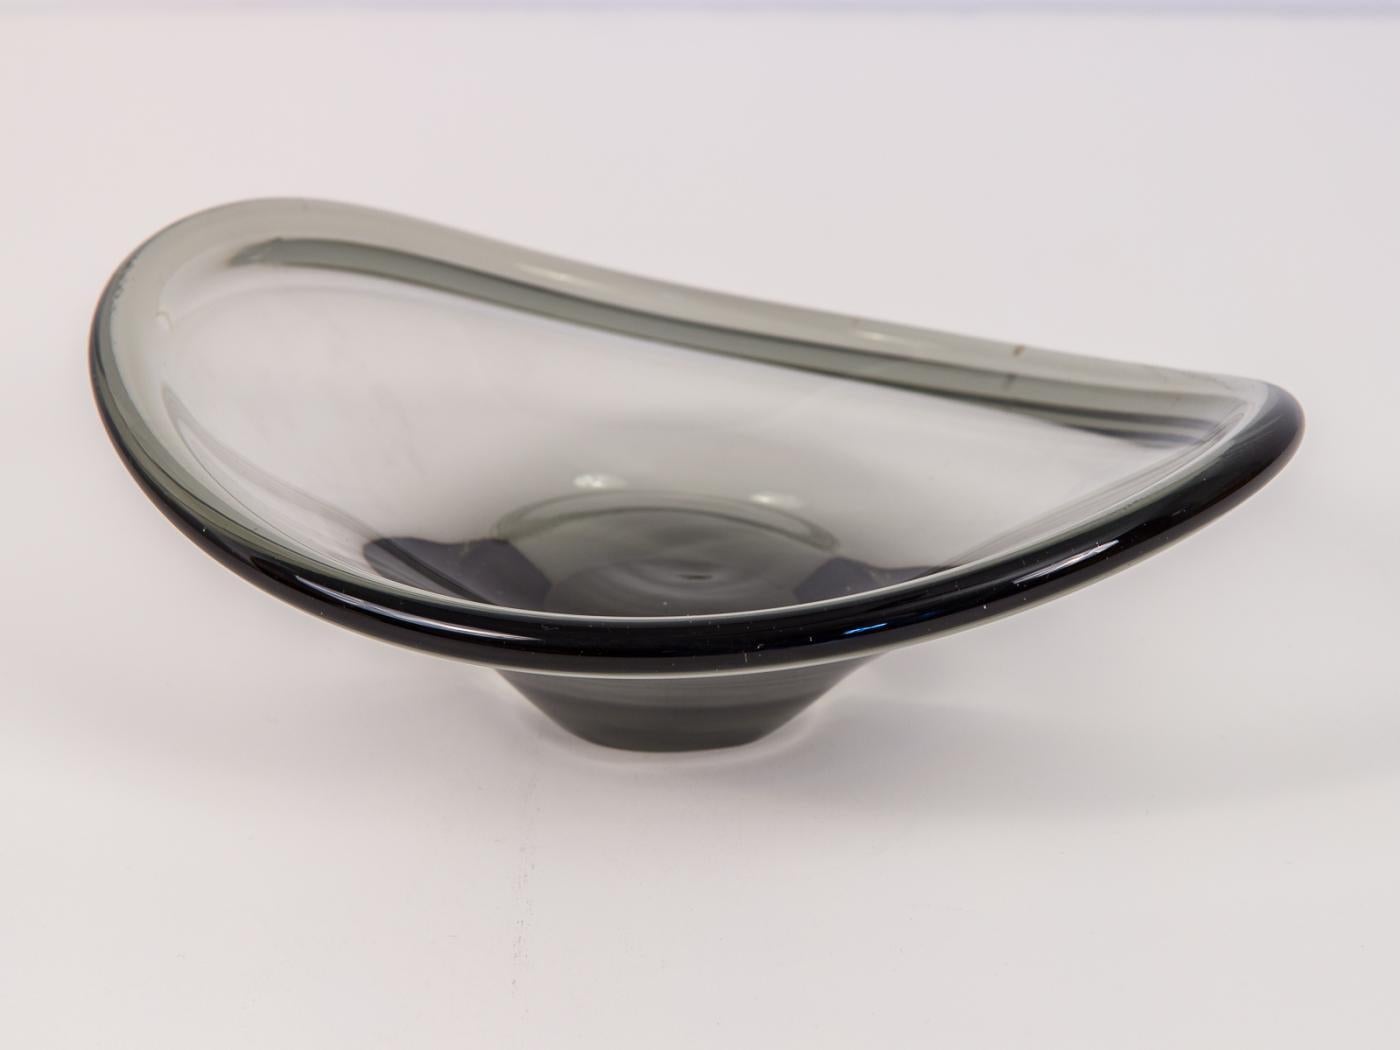 Small biomorphic smoked glass serving bowl. Designed by Per Lütken for Holmegaard in the 1940s, this petite, hand blown glass curvilinear bowl has a elegantly sculpted look. Etched on the underside with the Holmegaard company name and edition number.